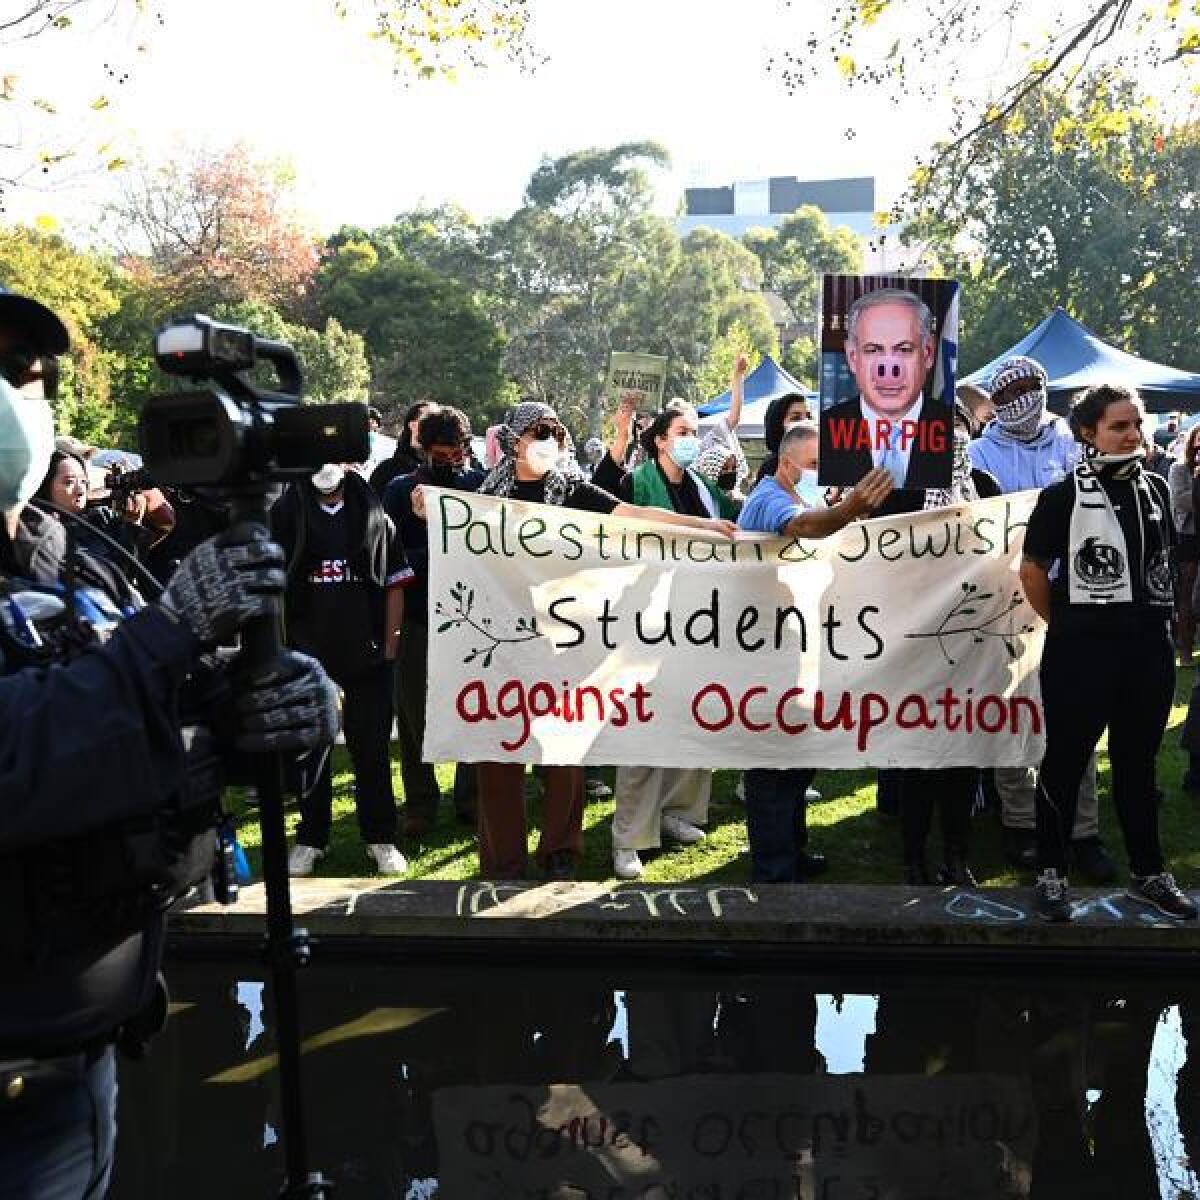 Members of a Pro-Palestine encampment at the University of Melbourne